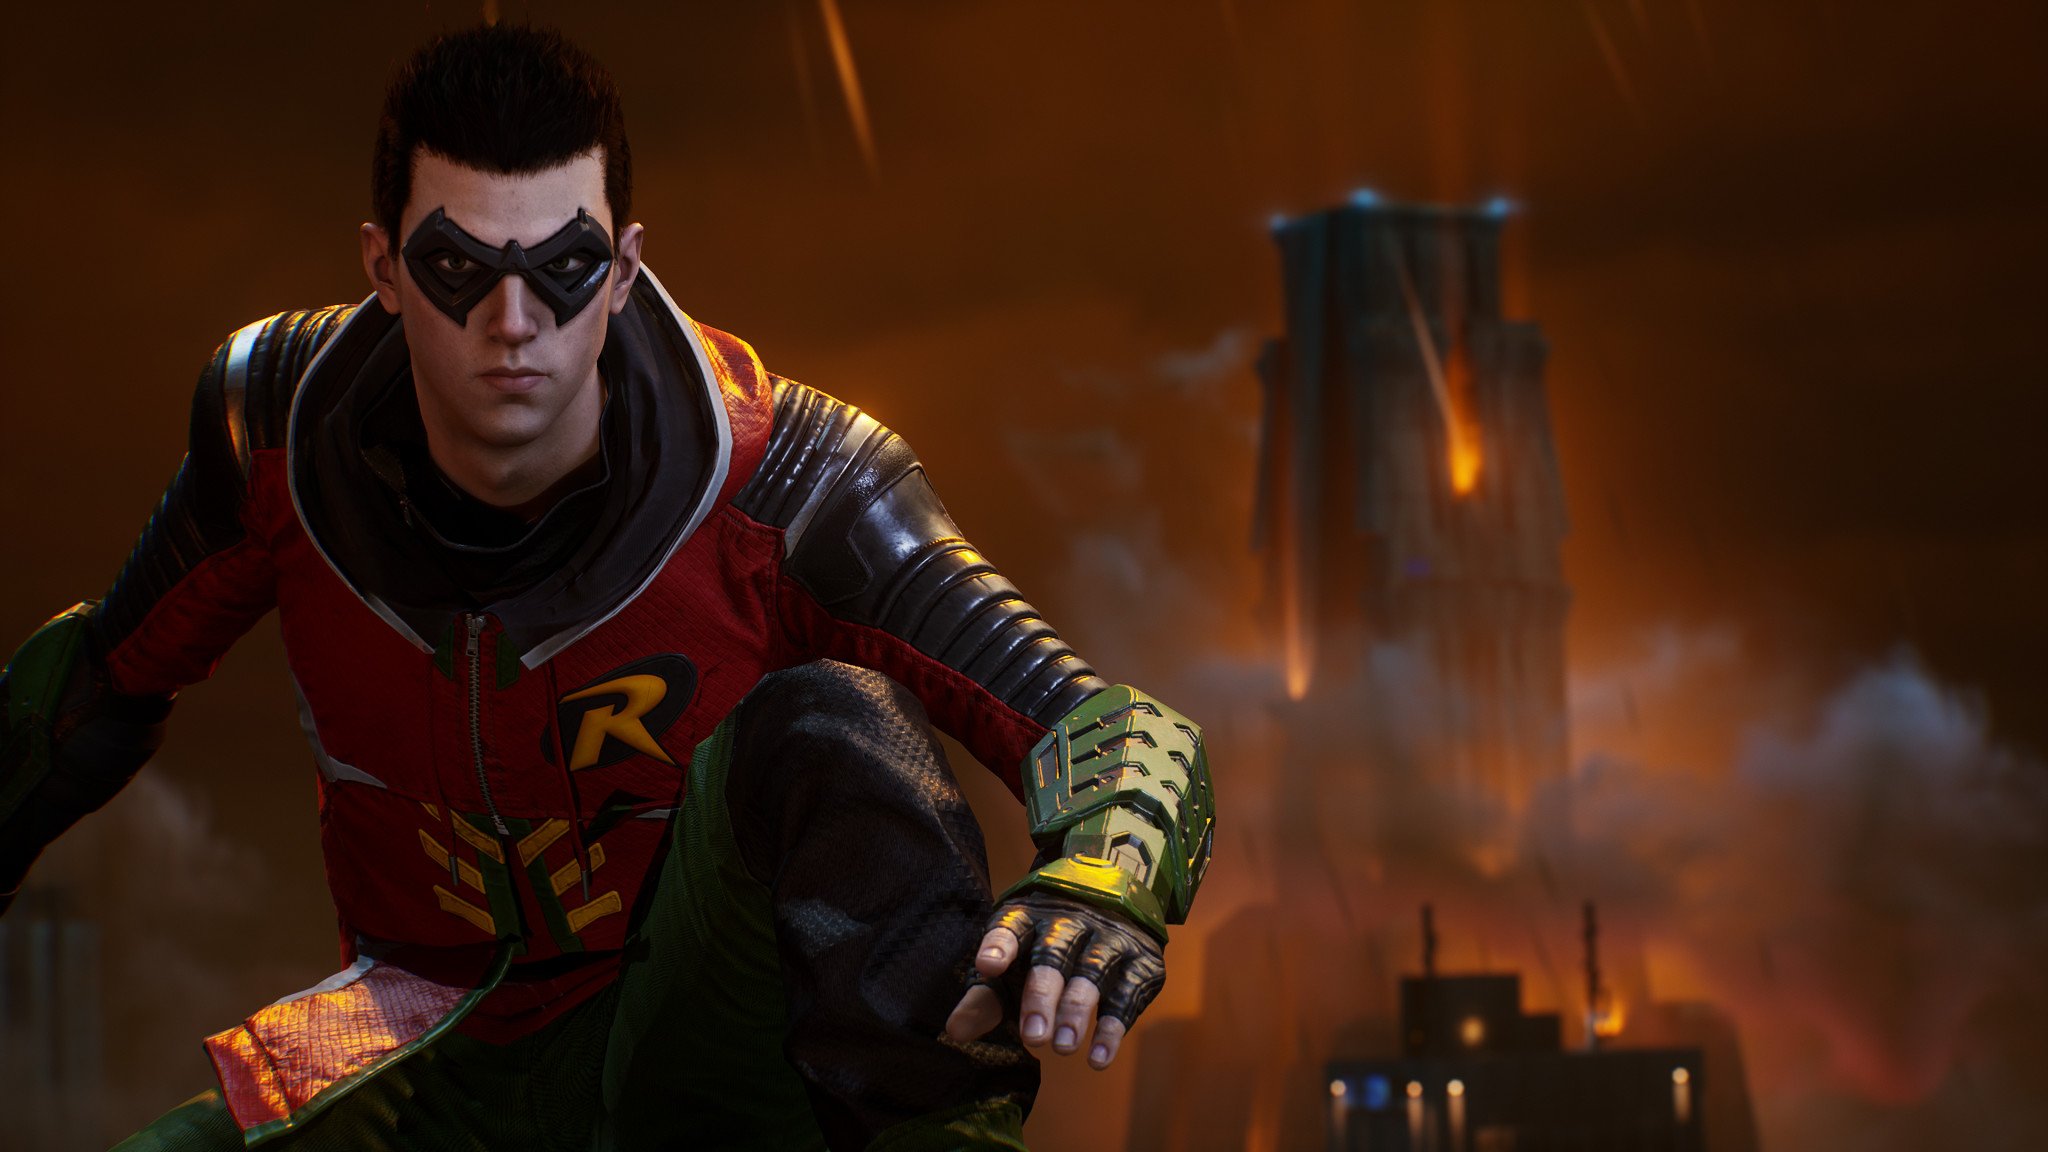 Gotham Knights Co-op Might Support Up to 4 Players Instead of 2